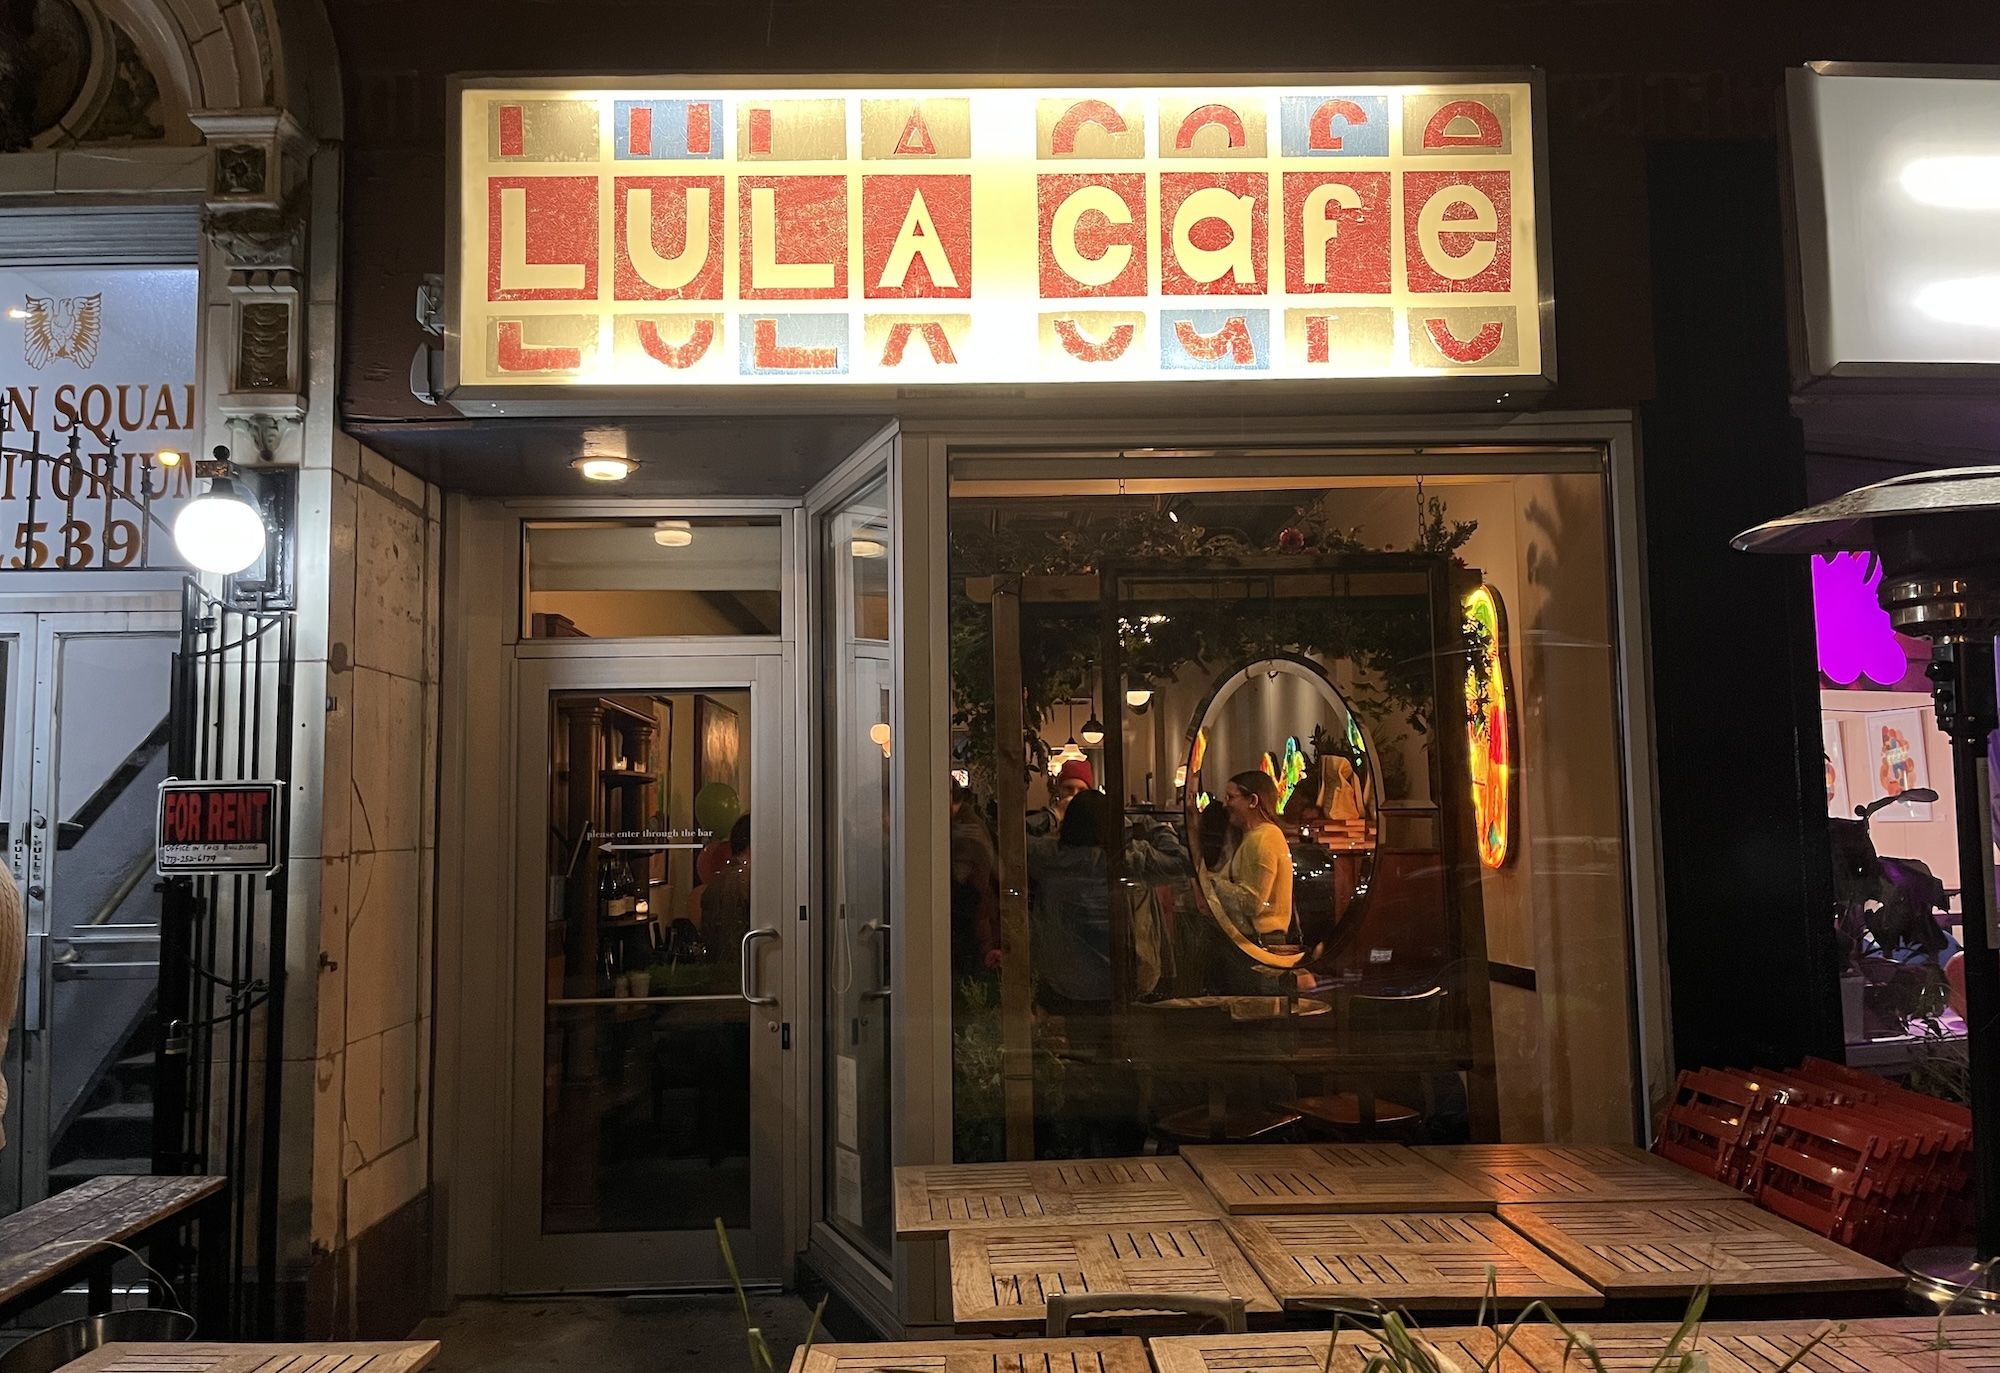 From of restaurant with brightly colored sign reading Lula Cafe.